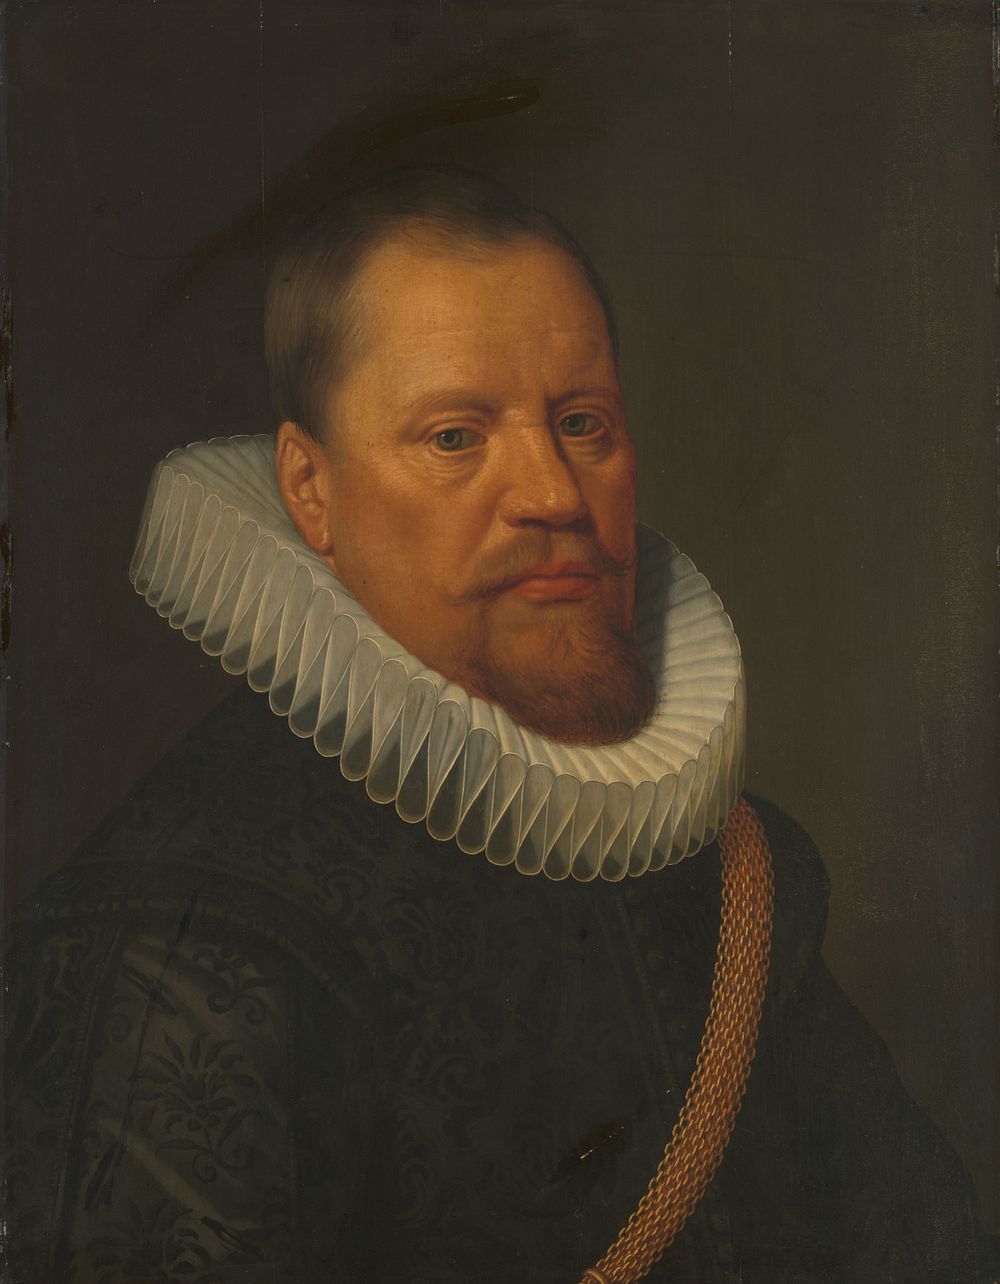 Portrait of a Man (c. 1615 - c. 1620) by anonymous